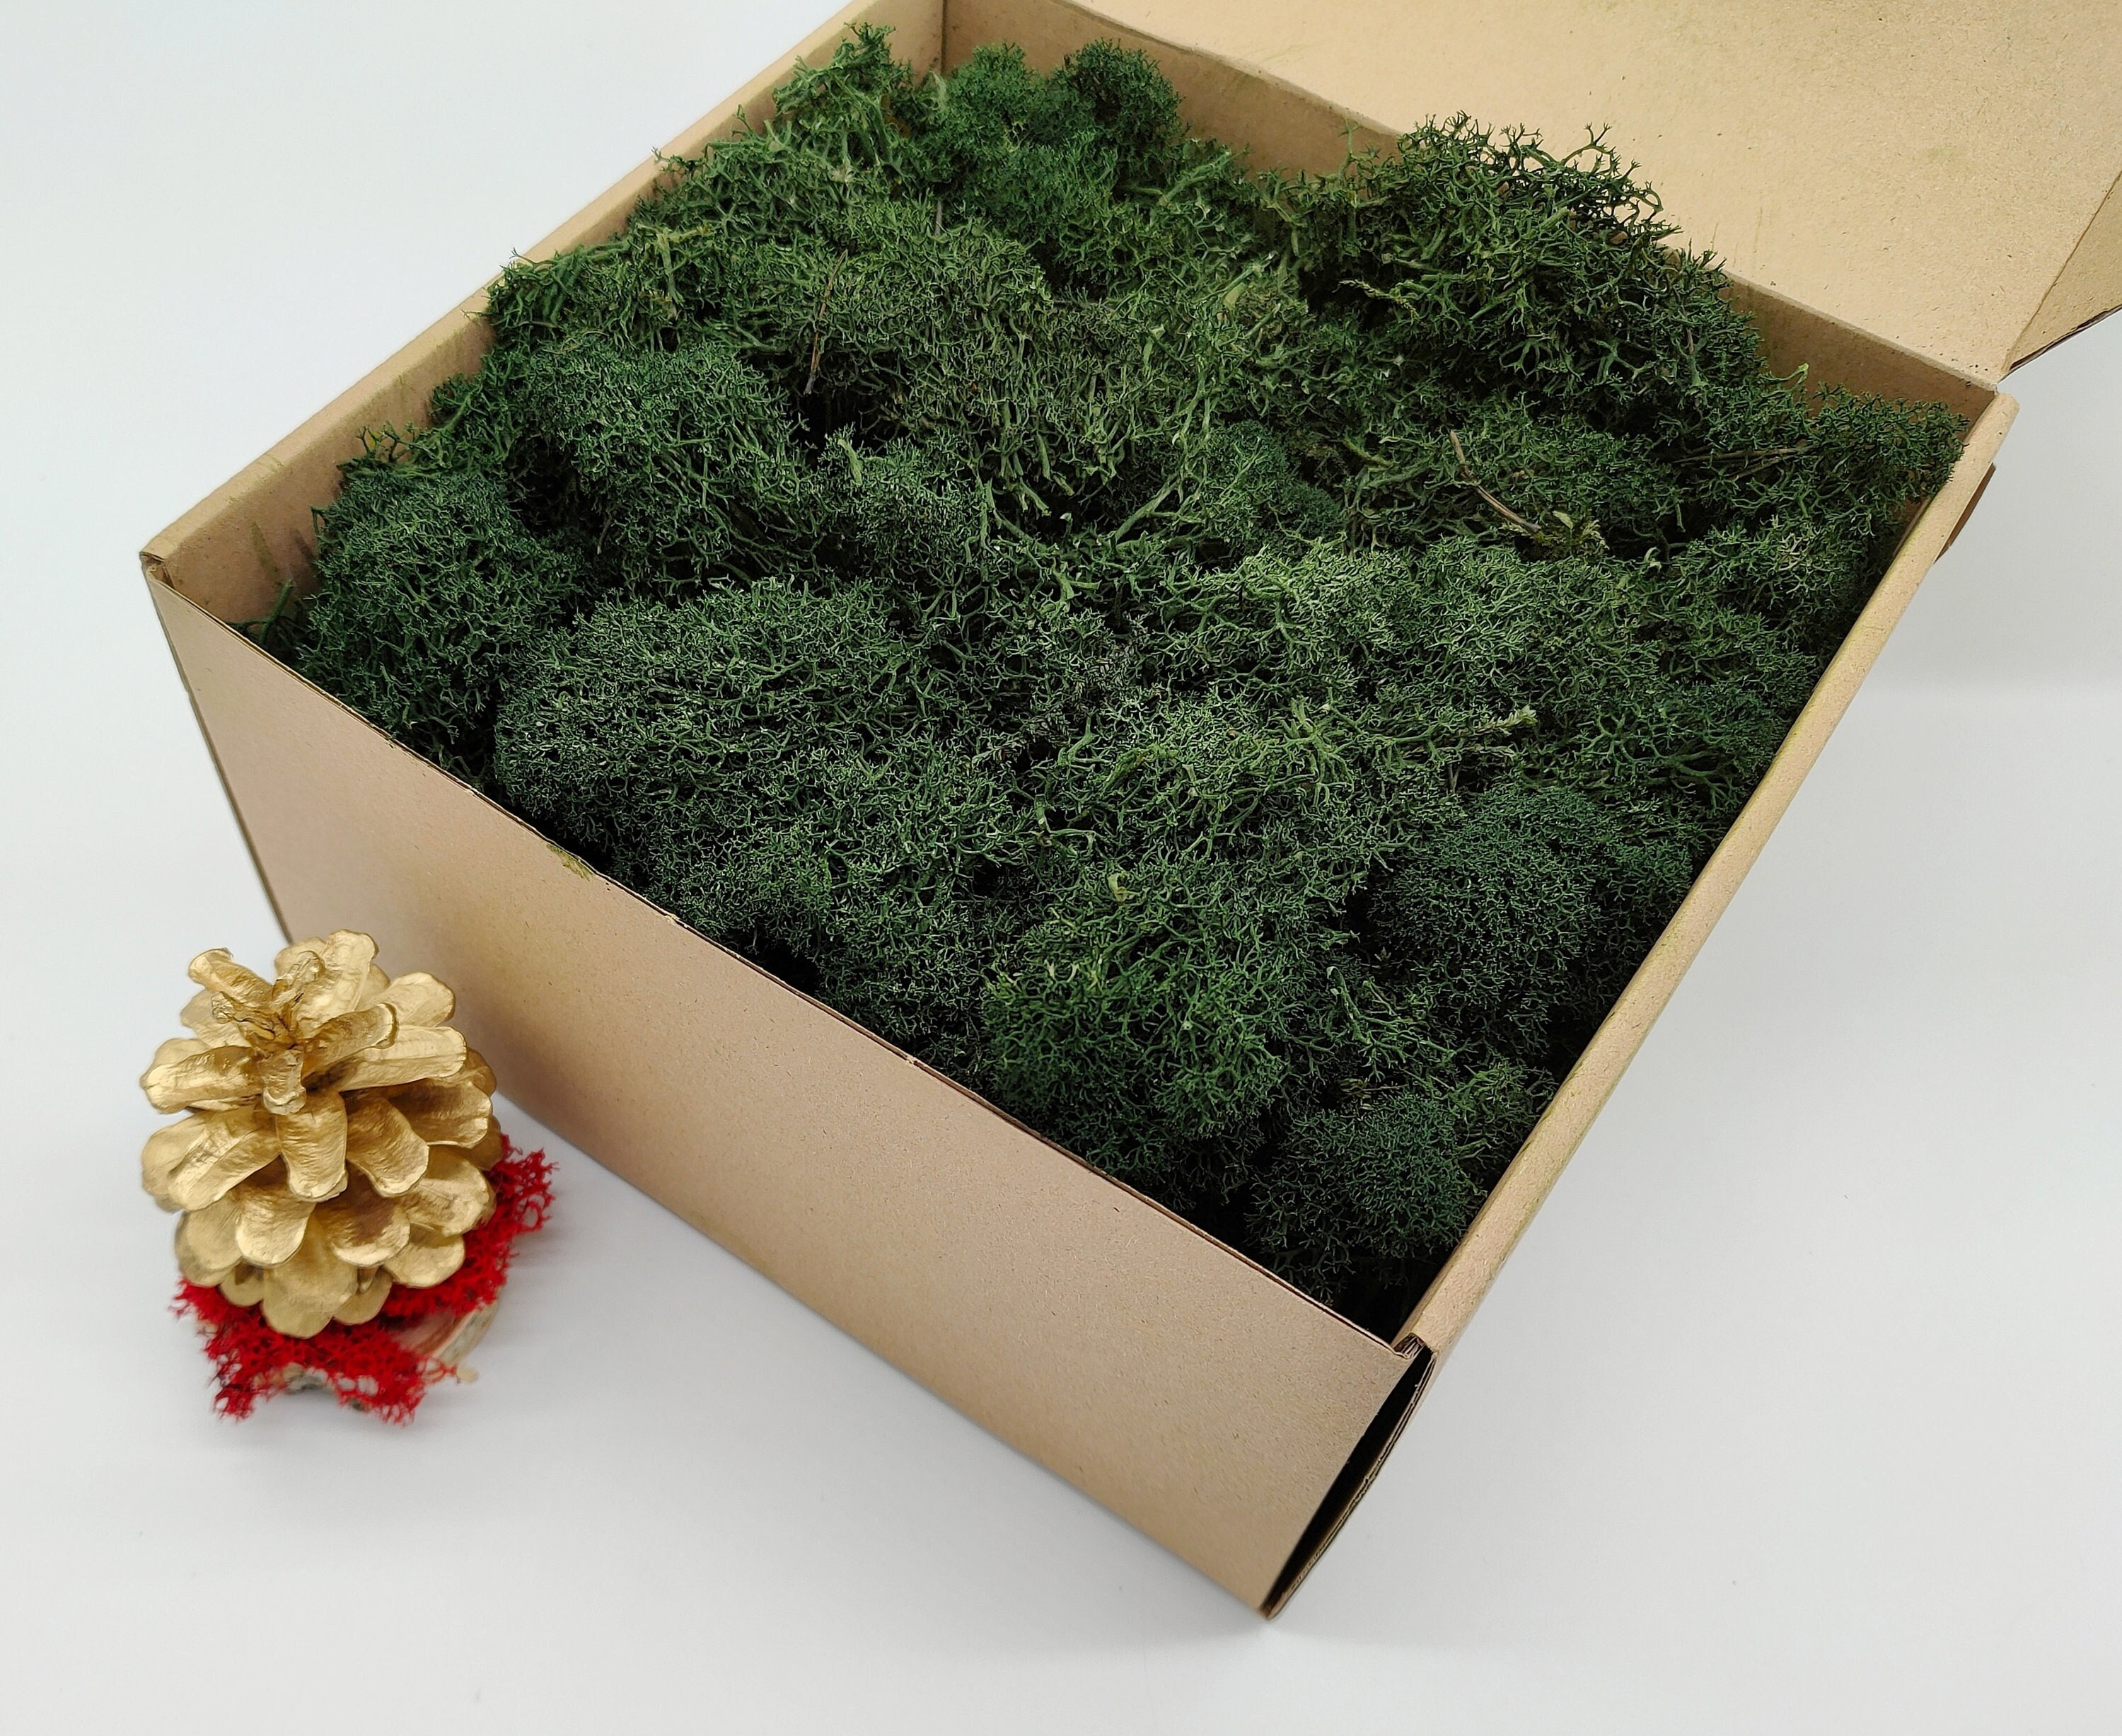 Reindeer Moss 5 Colors. Real Preserved Natural Moss for Crafts, Moss for  Decoration or Model Making -  Finland